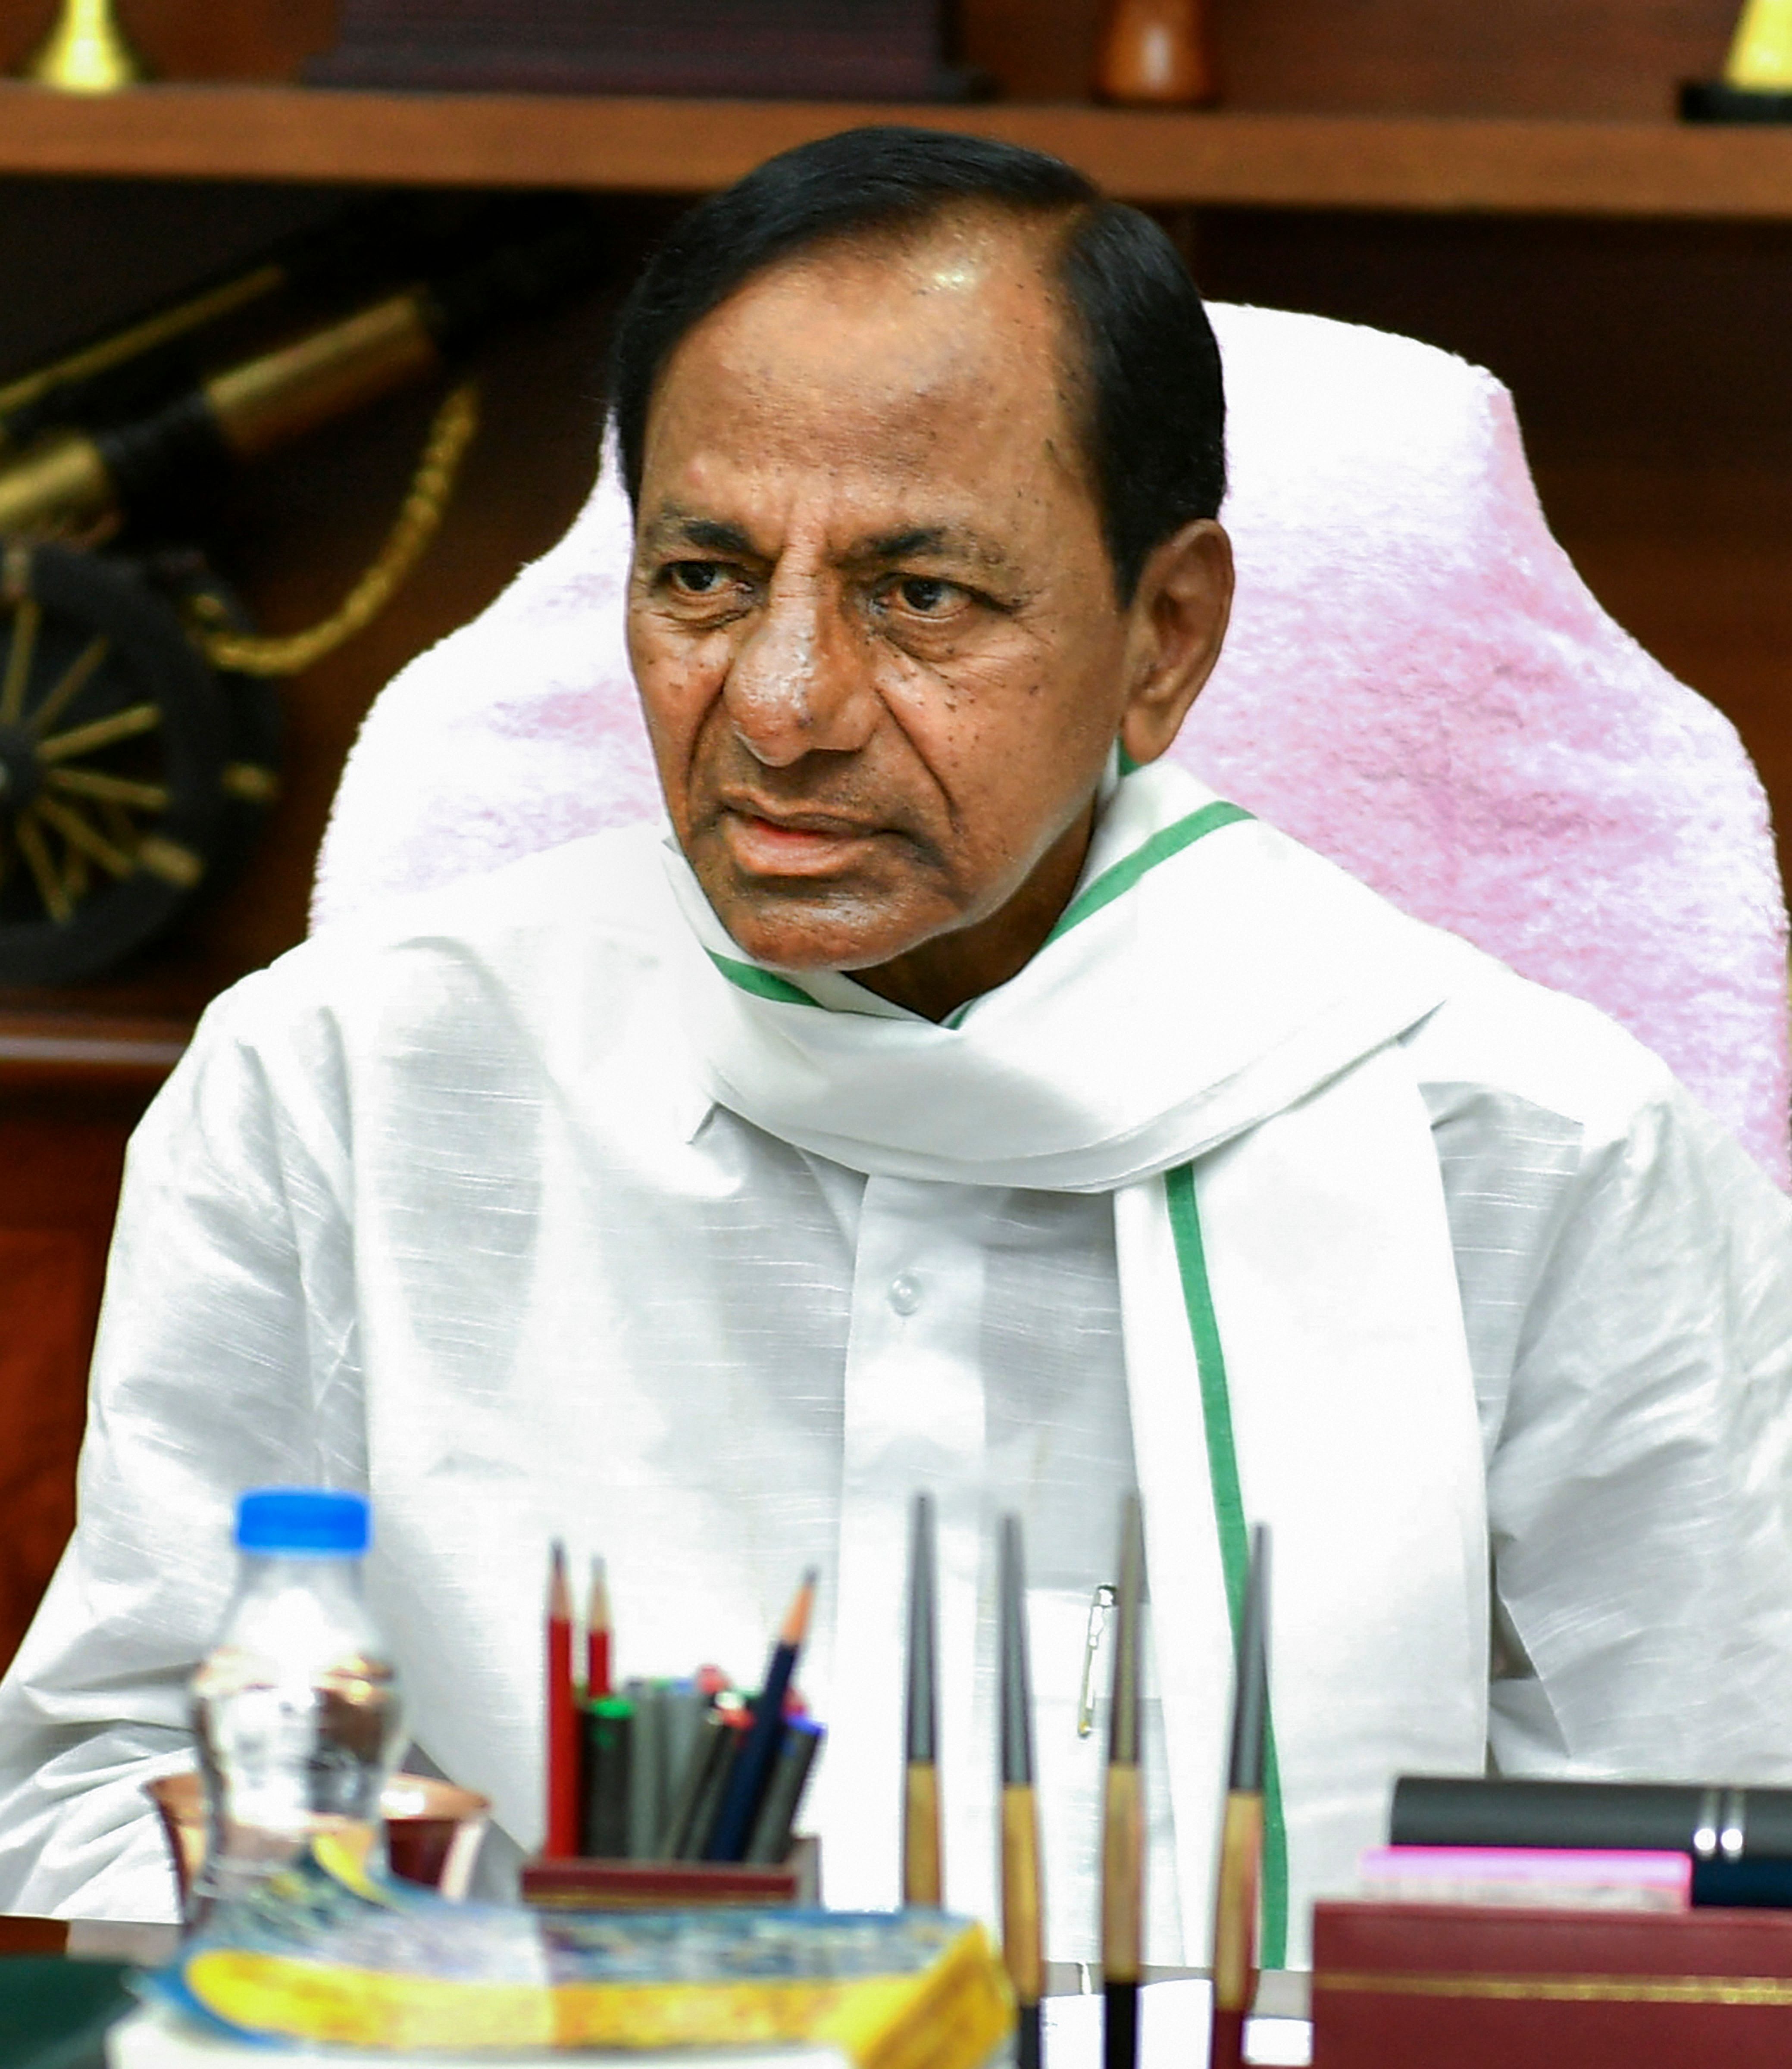 BJP leaders in Telangana were on Friday stopped from proceeding to the chief minister K Chandrasekhar Rao's office/residence. (PTI File Photo)